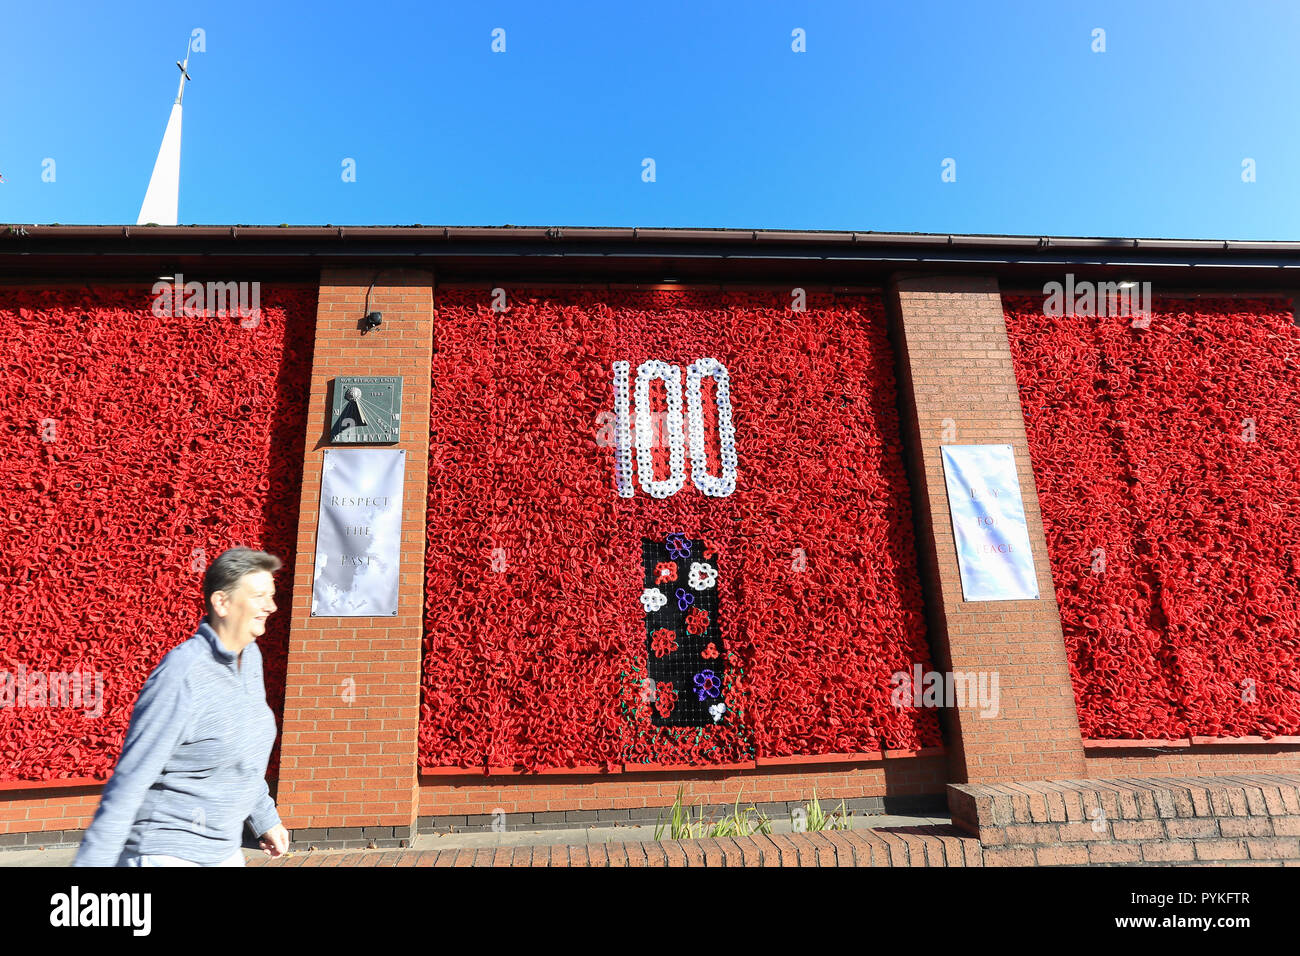 Bromsgrove, Worcestershire, UK. 29th October, 2018. A stunning display featuring 12,500 hand-knitted poppies adorns Bromsgrove Methodist Church walls. The centrepiece has the number '100' made with white wool poppies, a symbol of peace. Purple poppies also feature which commemorates the many animals - mainly horses - who were in the First World War. The poppies came from all over the UK, but most were made by local people in Bromsgrove. Peter Lopeman/Alamy Live News Stock Photo